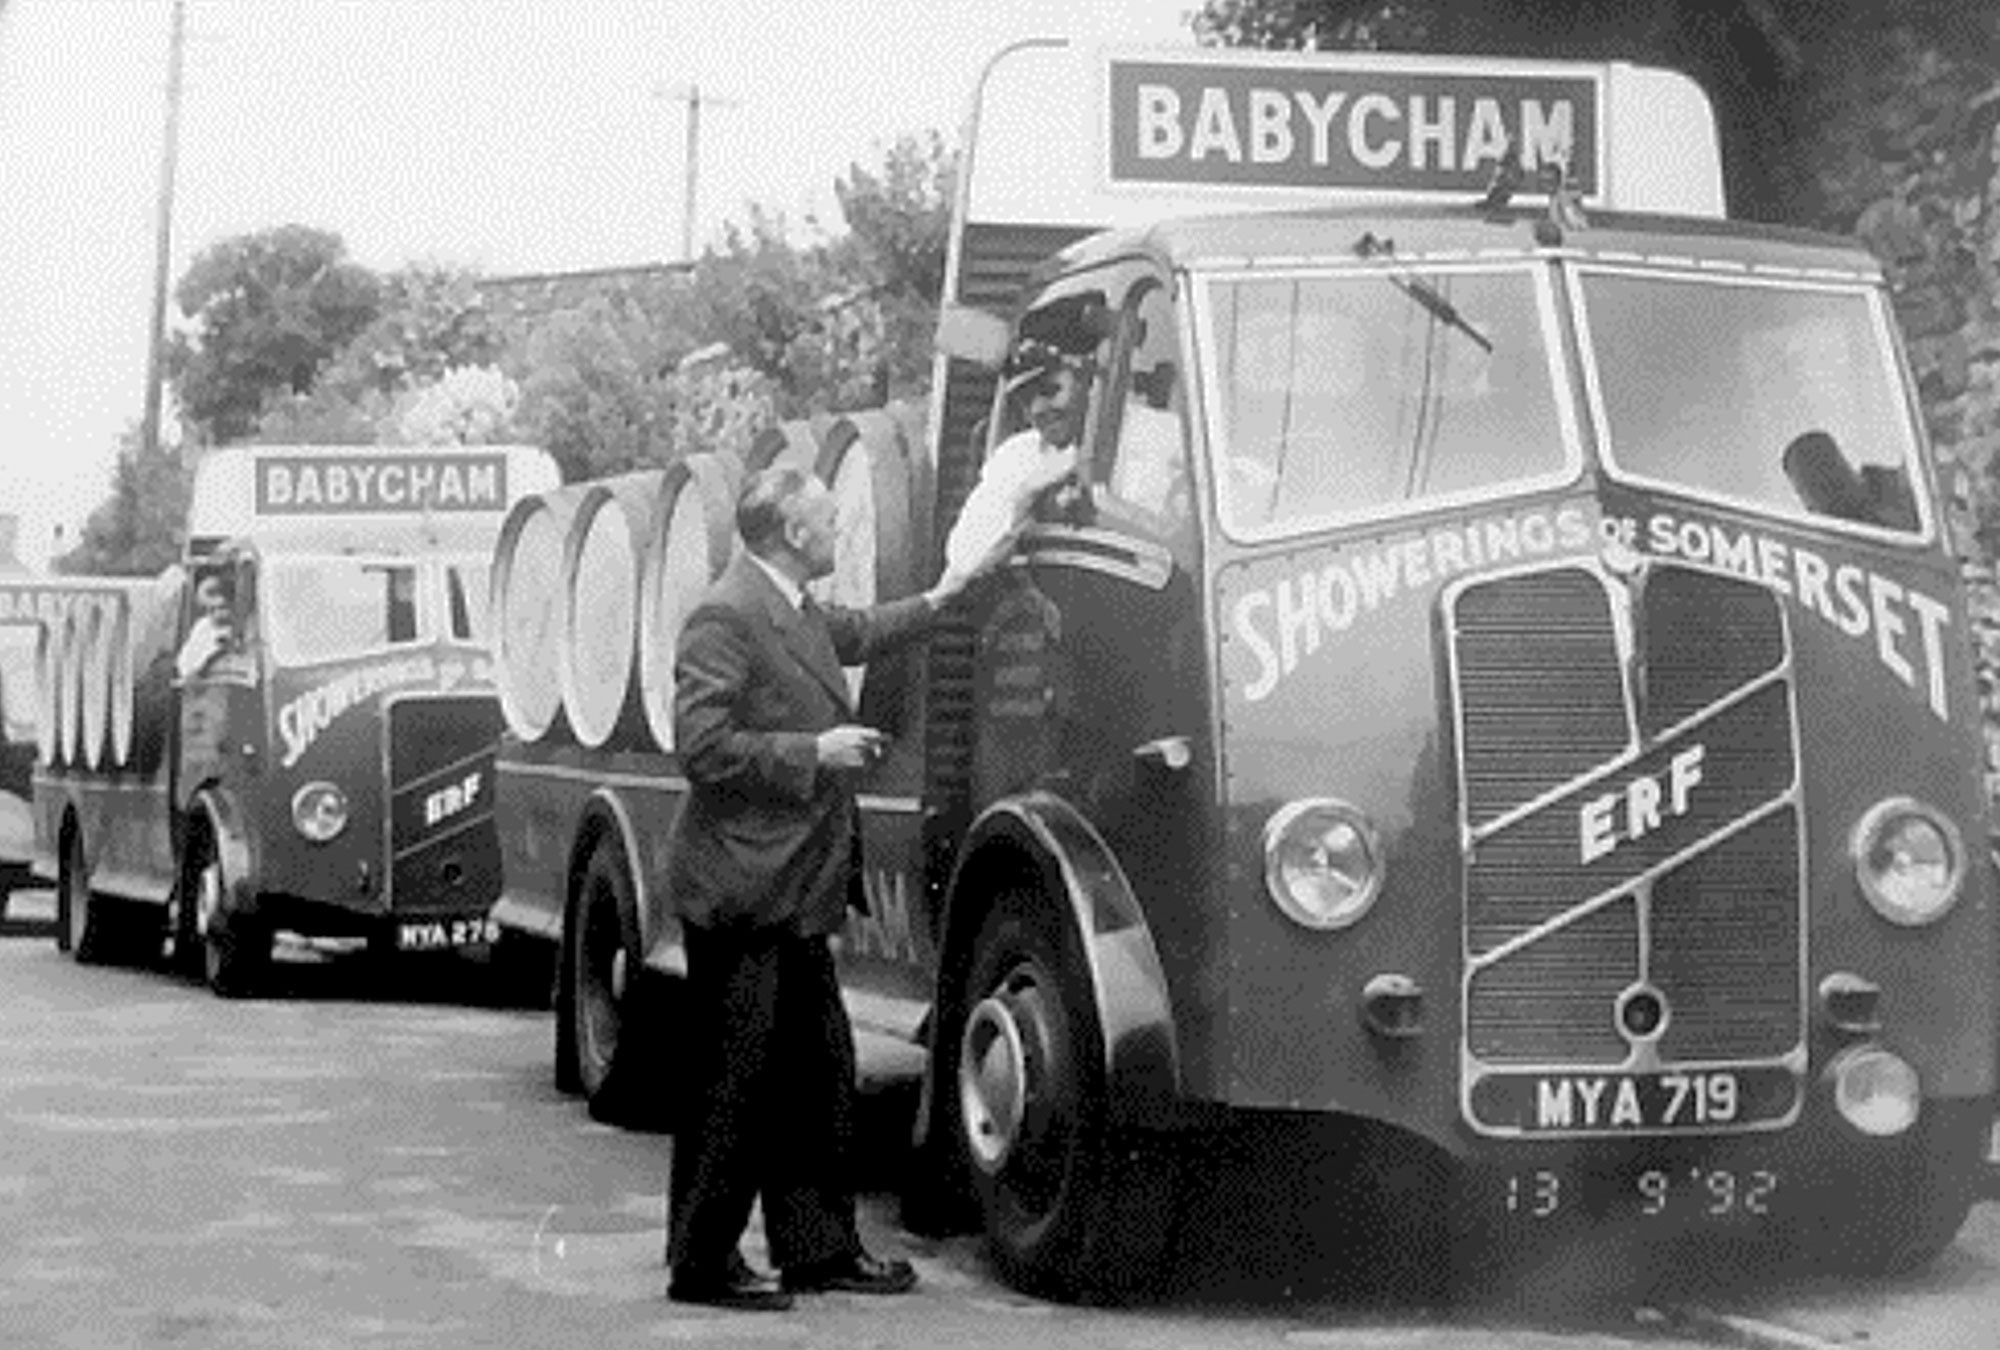 Three Babycham lorries loaded with Pear Juice from Switzerland